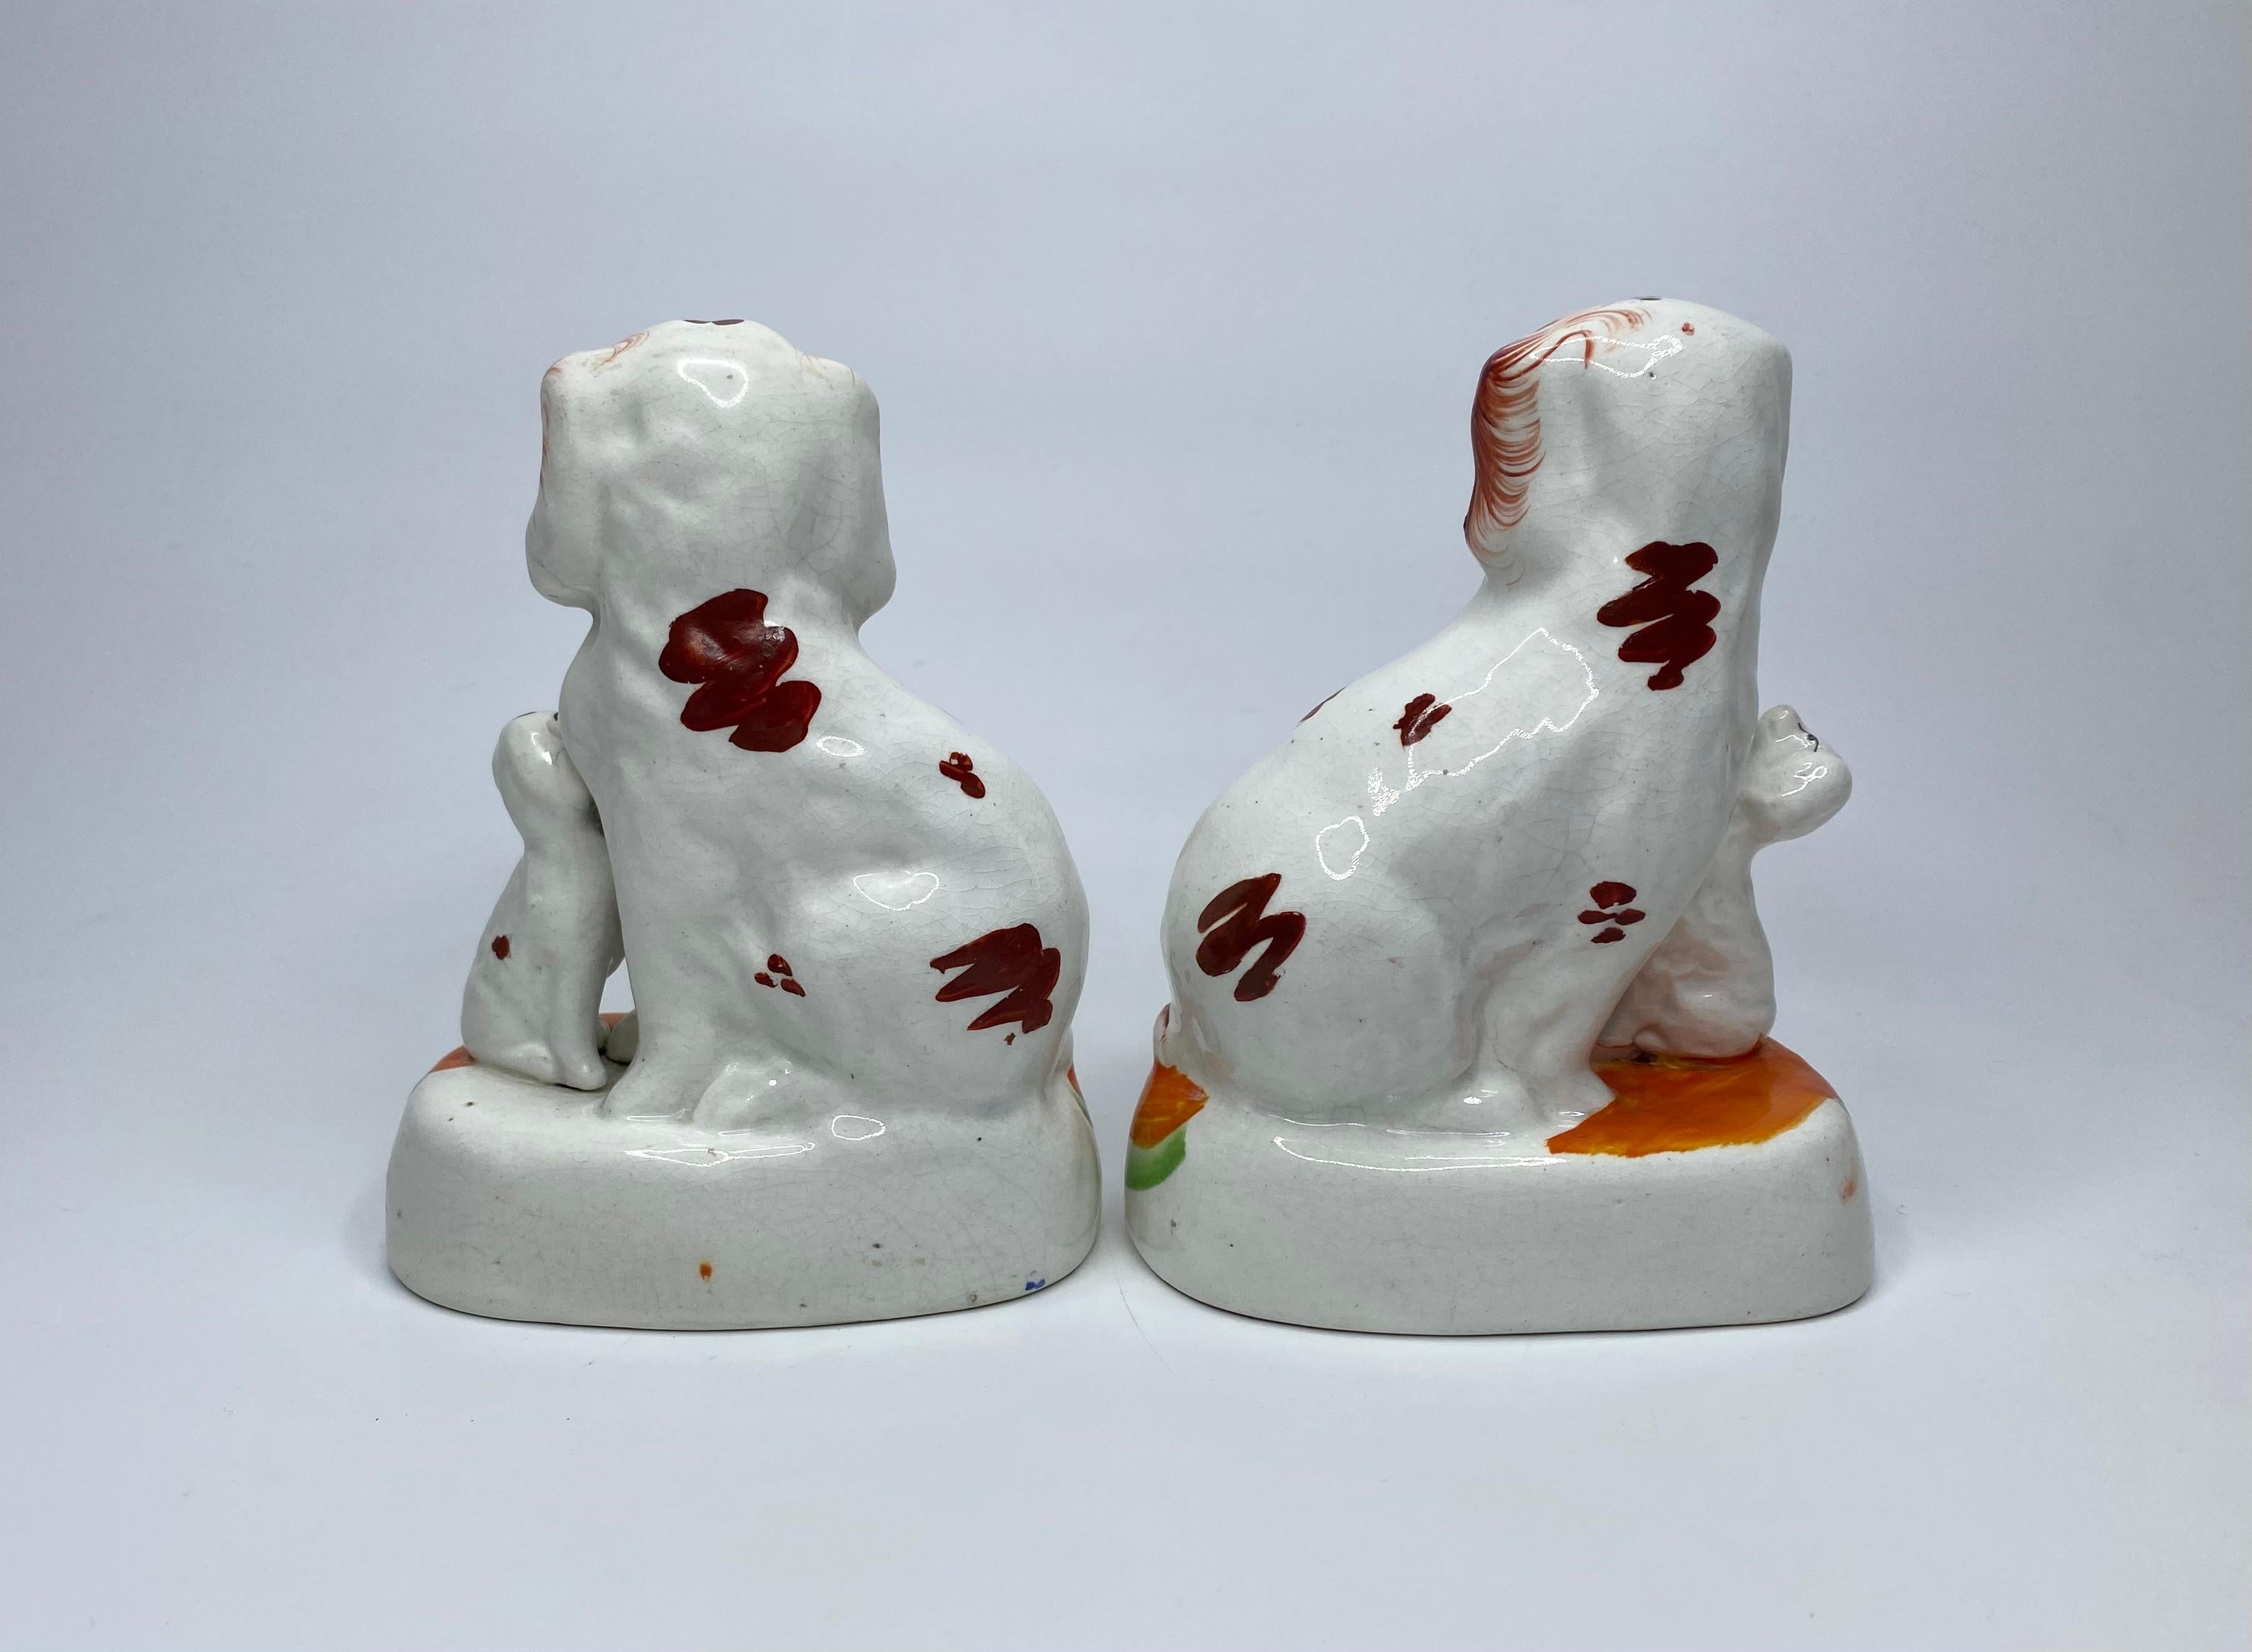 Pair of Staffordshire pottery Spaniels with puppies, c. 1850. Charmingly modelled, as seated Spaniels, with their puppies, painted with liver red spots, feathered at the edges. Both groups, set upon orange coloured cushion bases, with gilt and blue